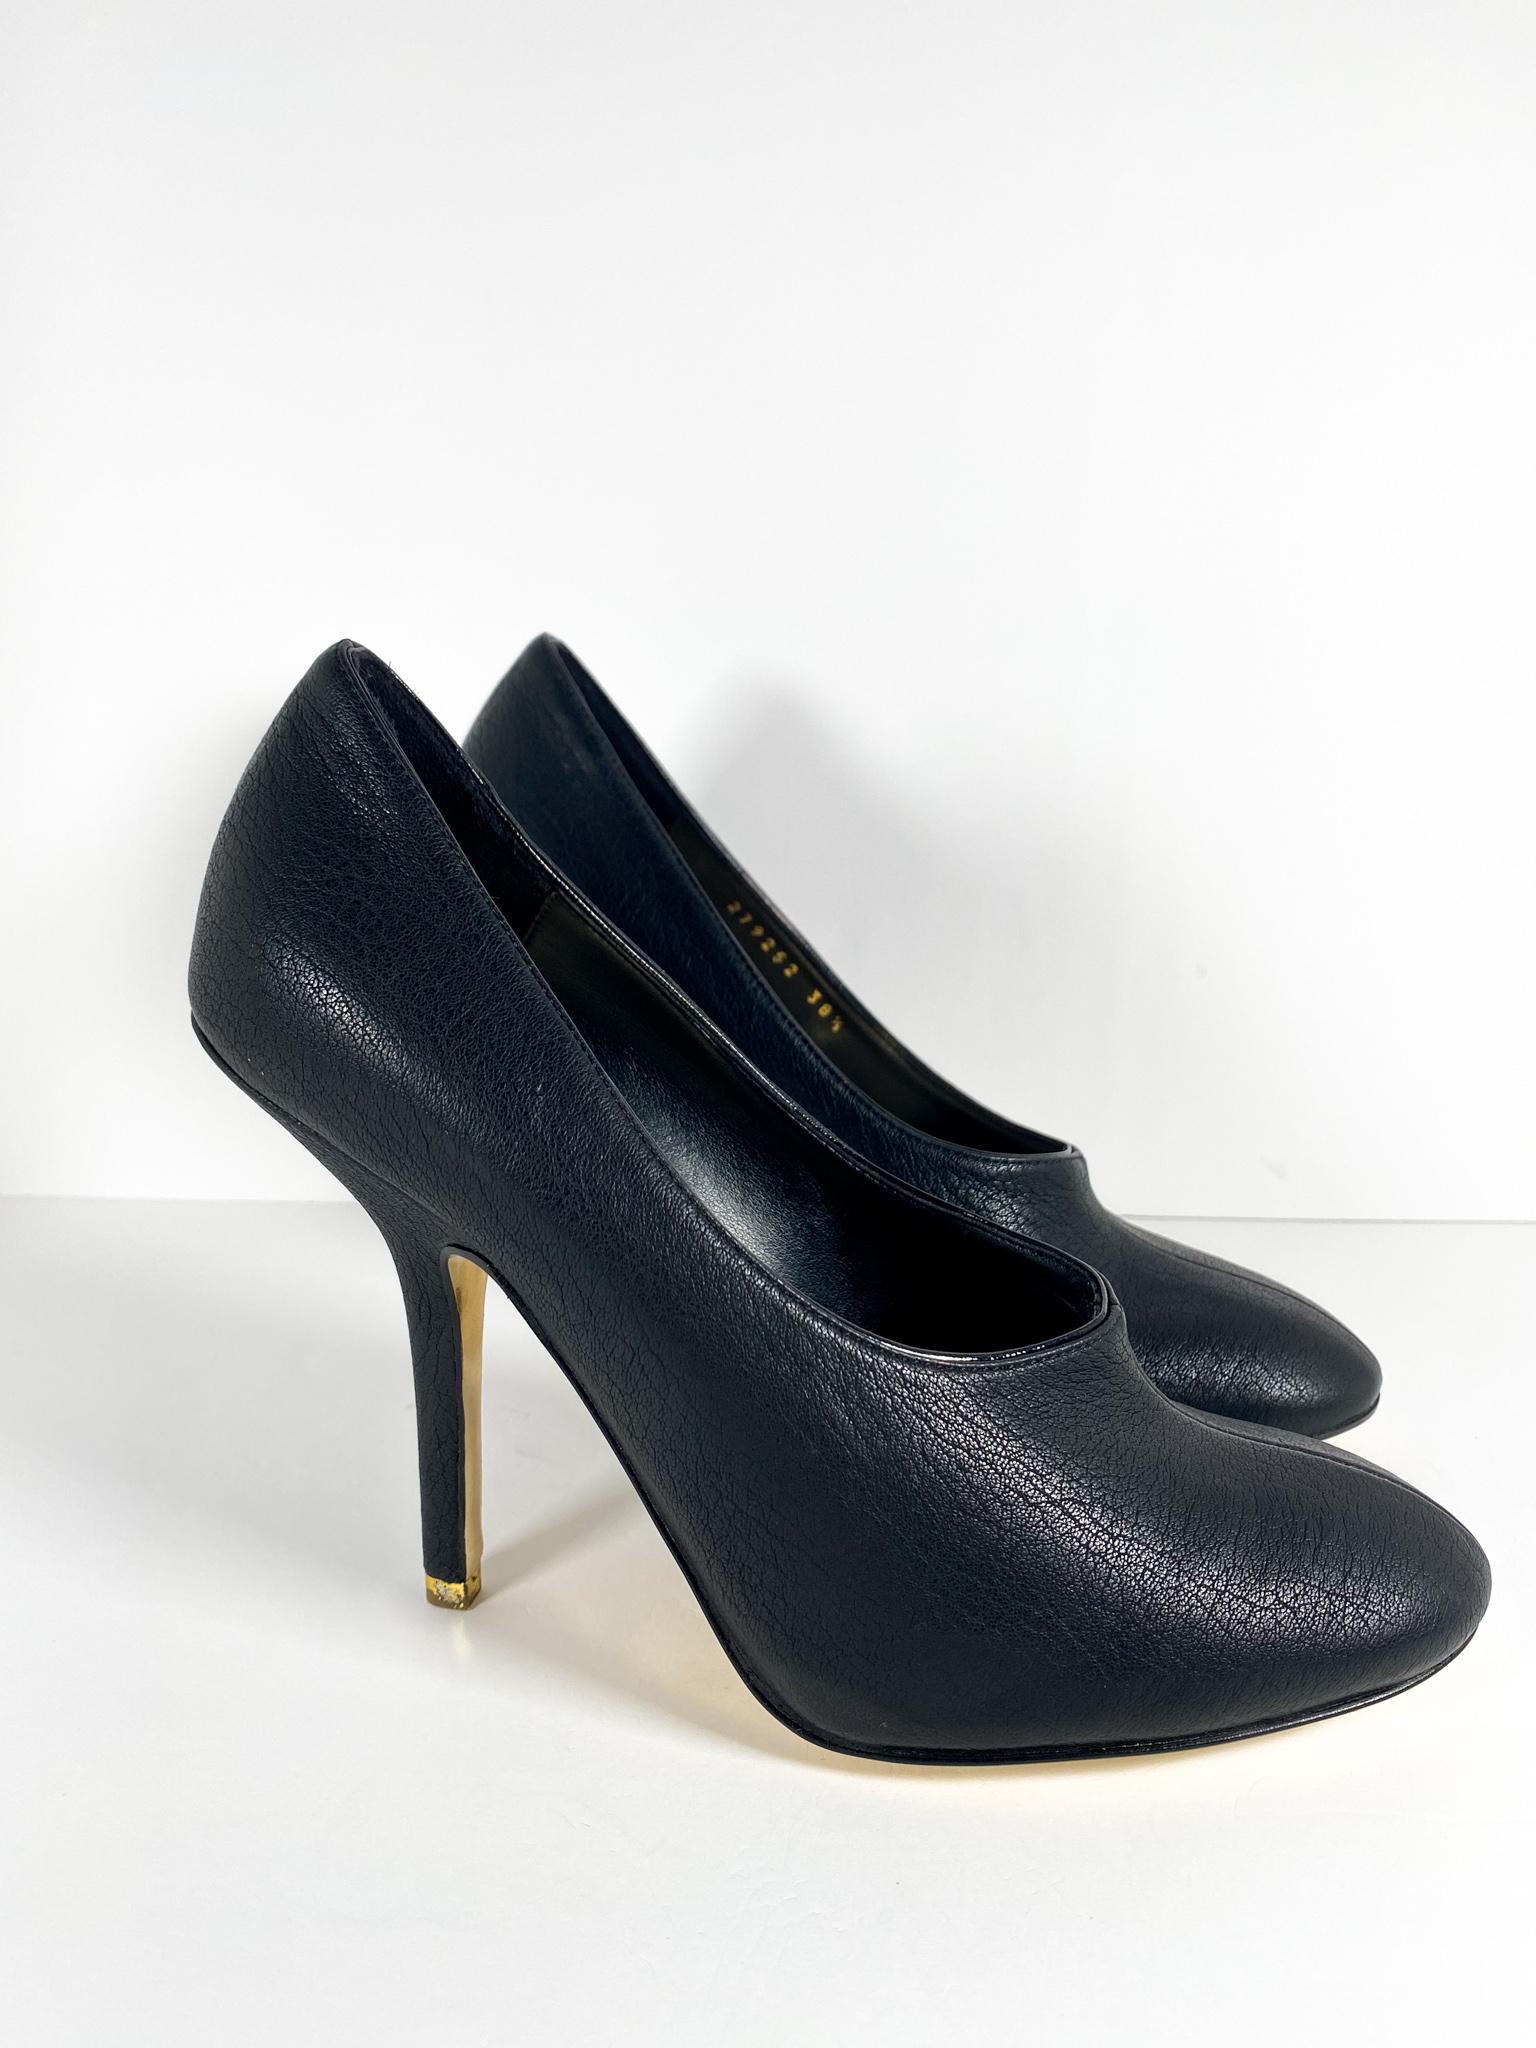 Stella McCartney Black (Faux) Leather Heels In Good Condition For Sale In Annapolis, MD